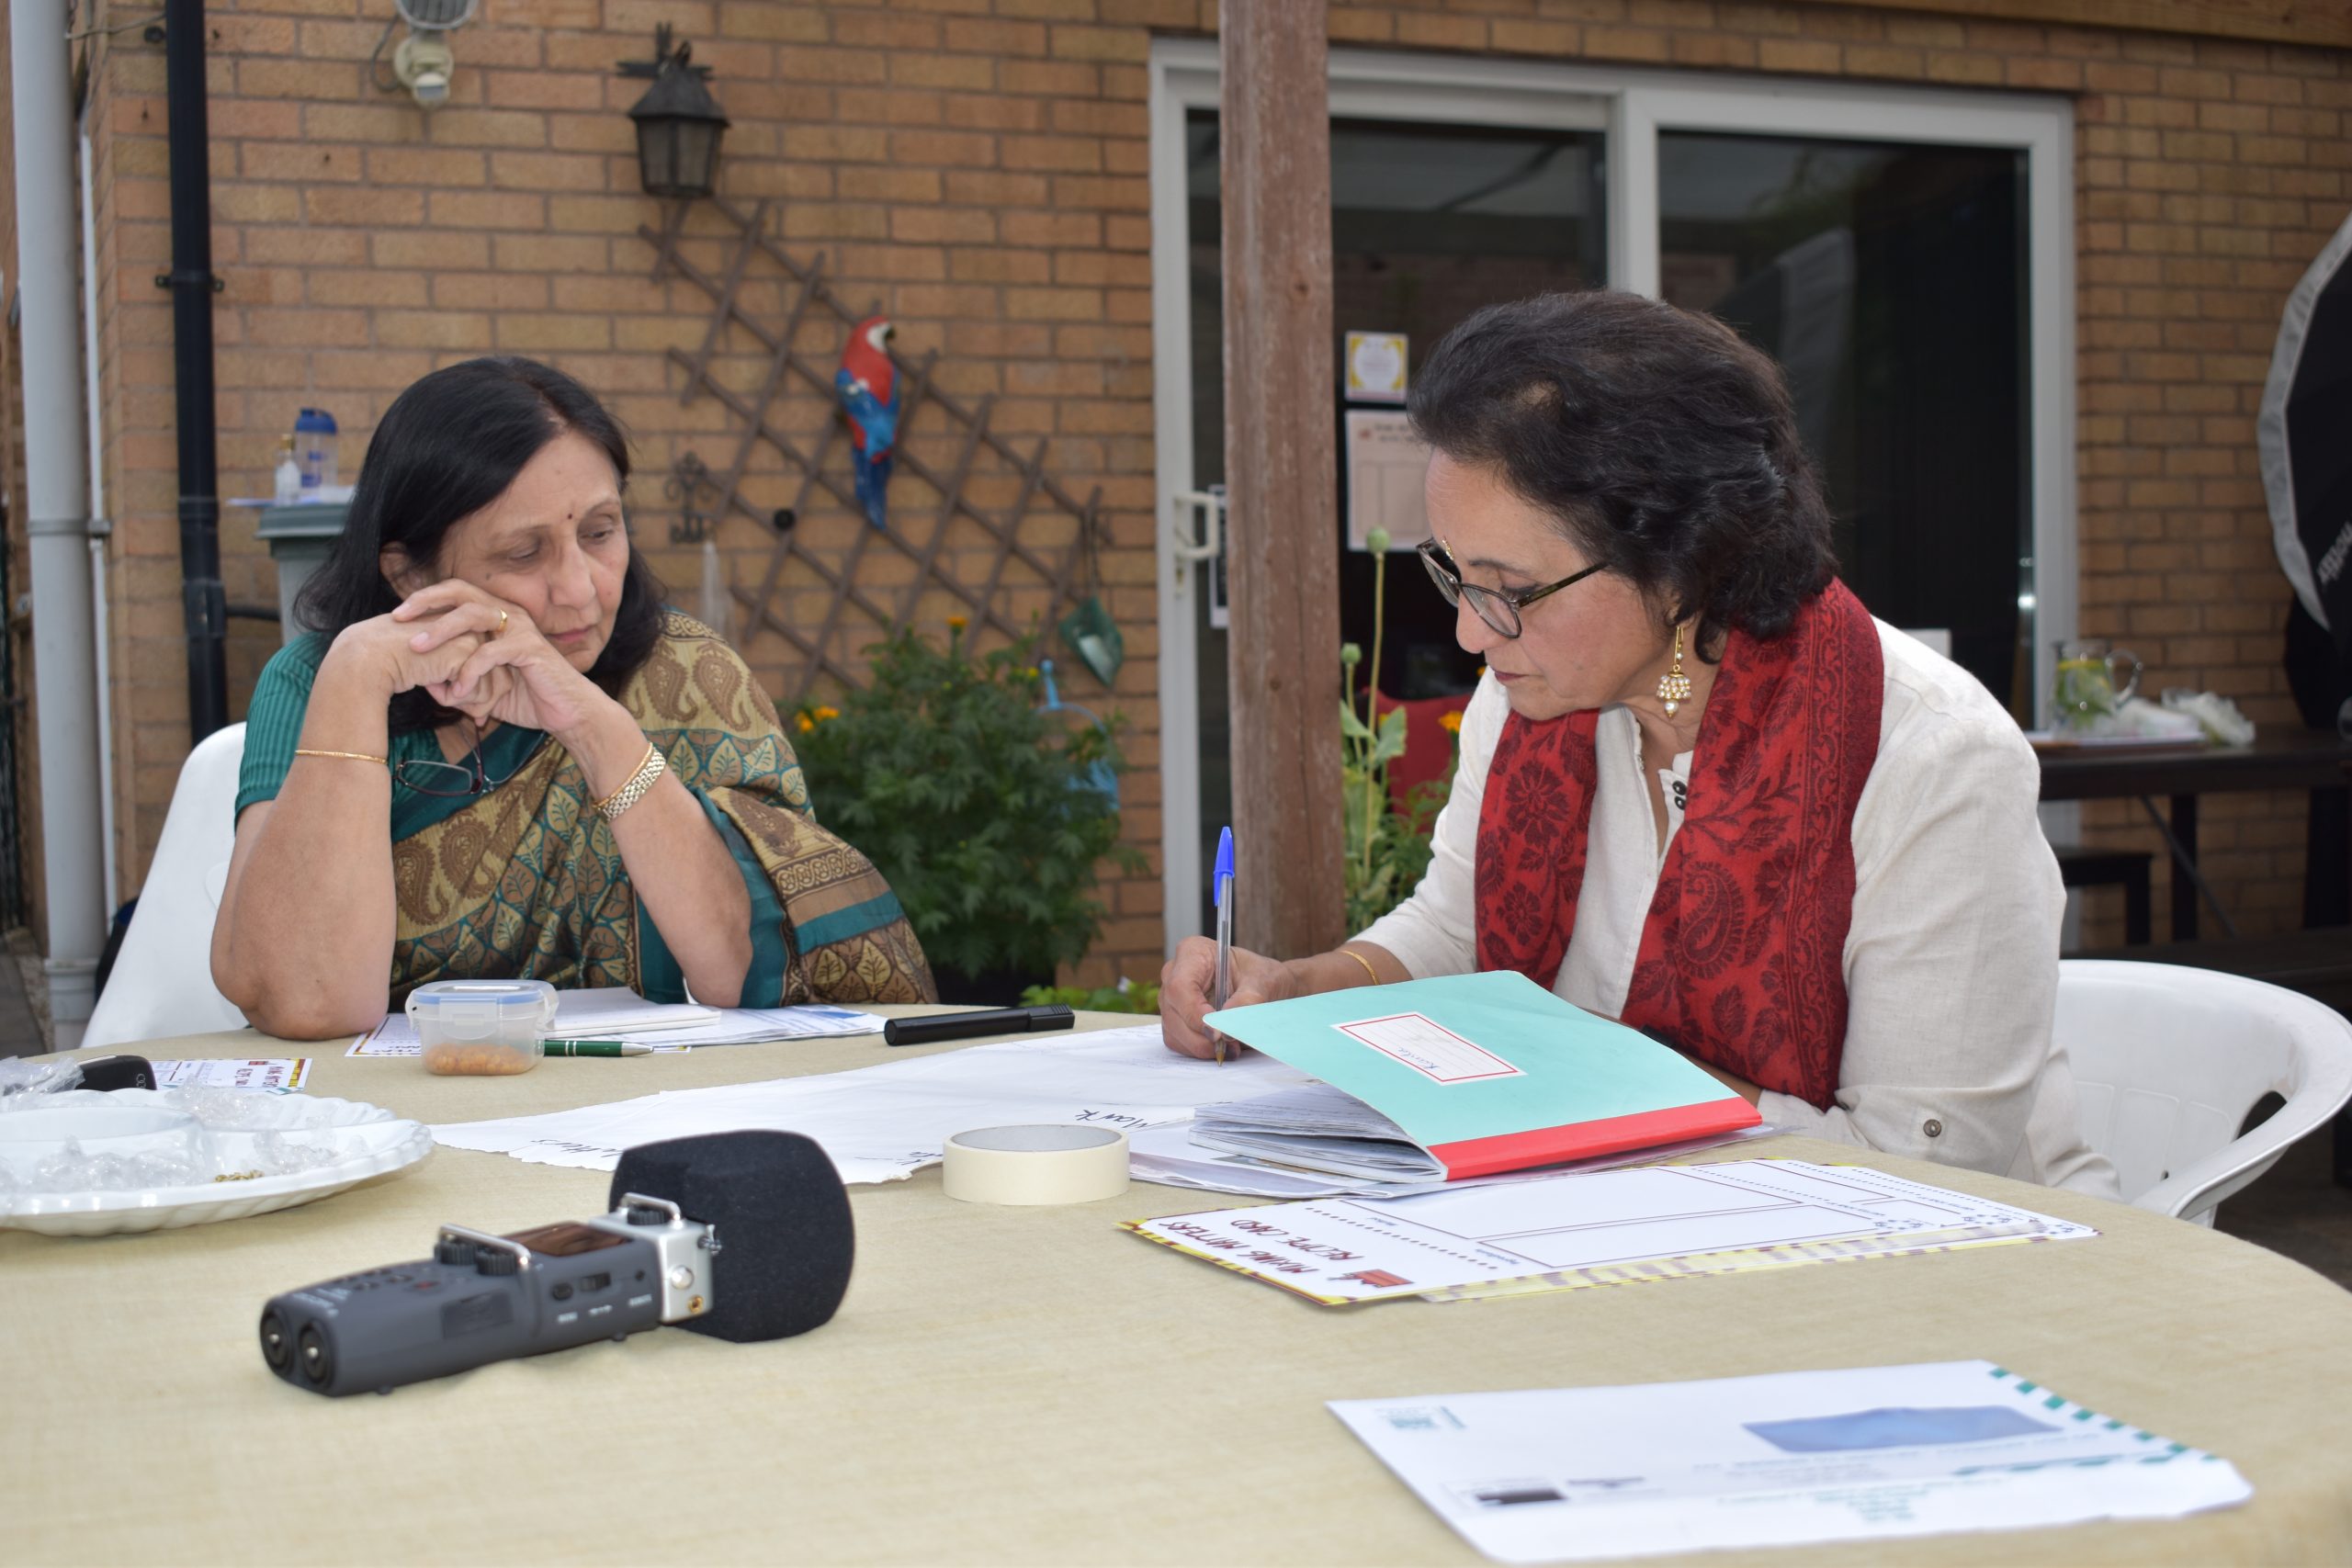 A photo of two women swapping recipes with their conversation being recorded.